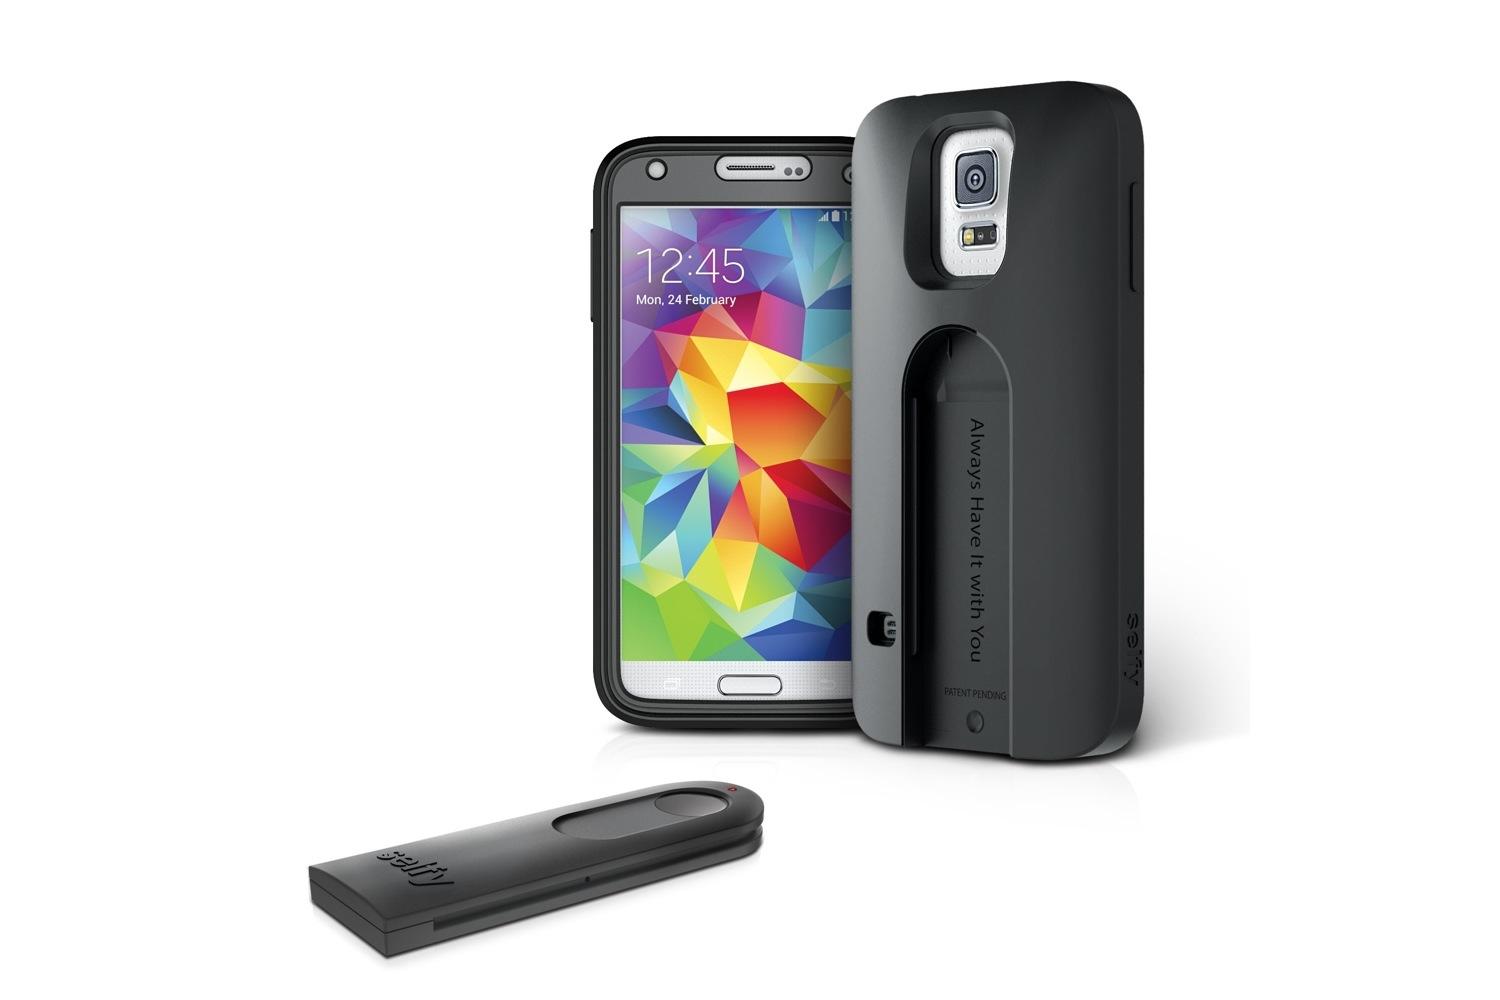 iluv smartphone case with built in remote shutter designed for the selfie obsessed selfy galaxy s5 black